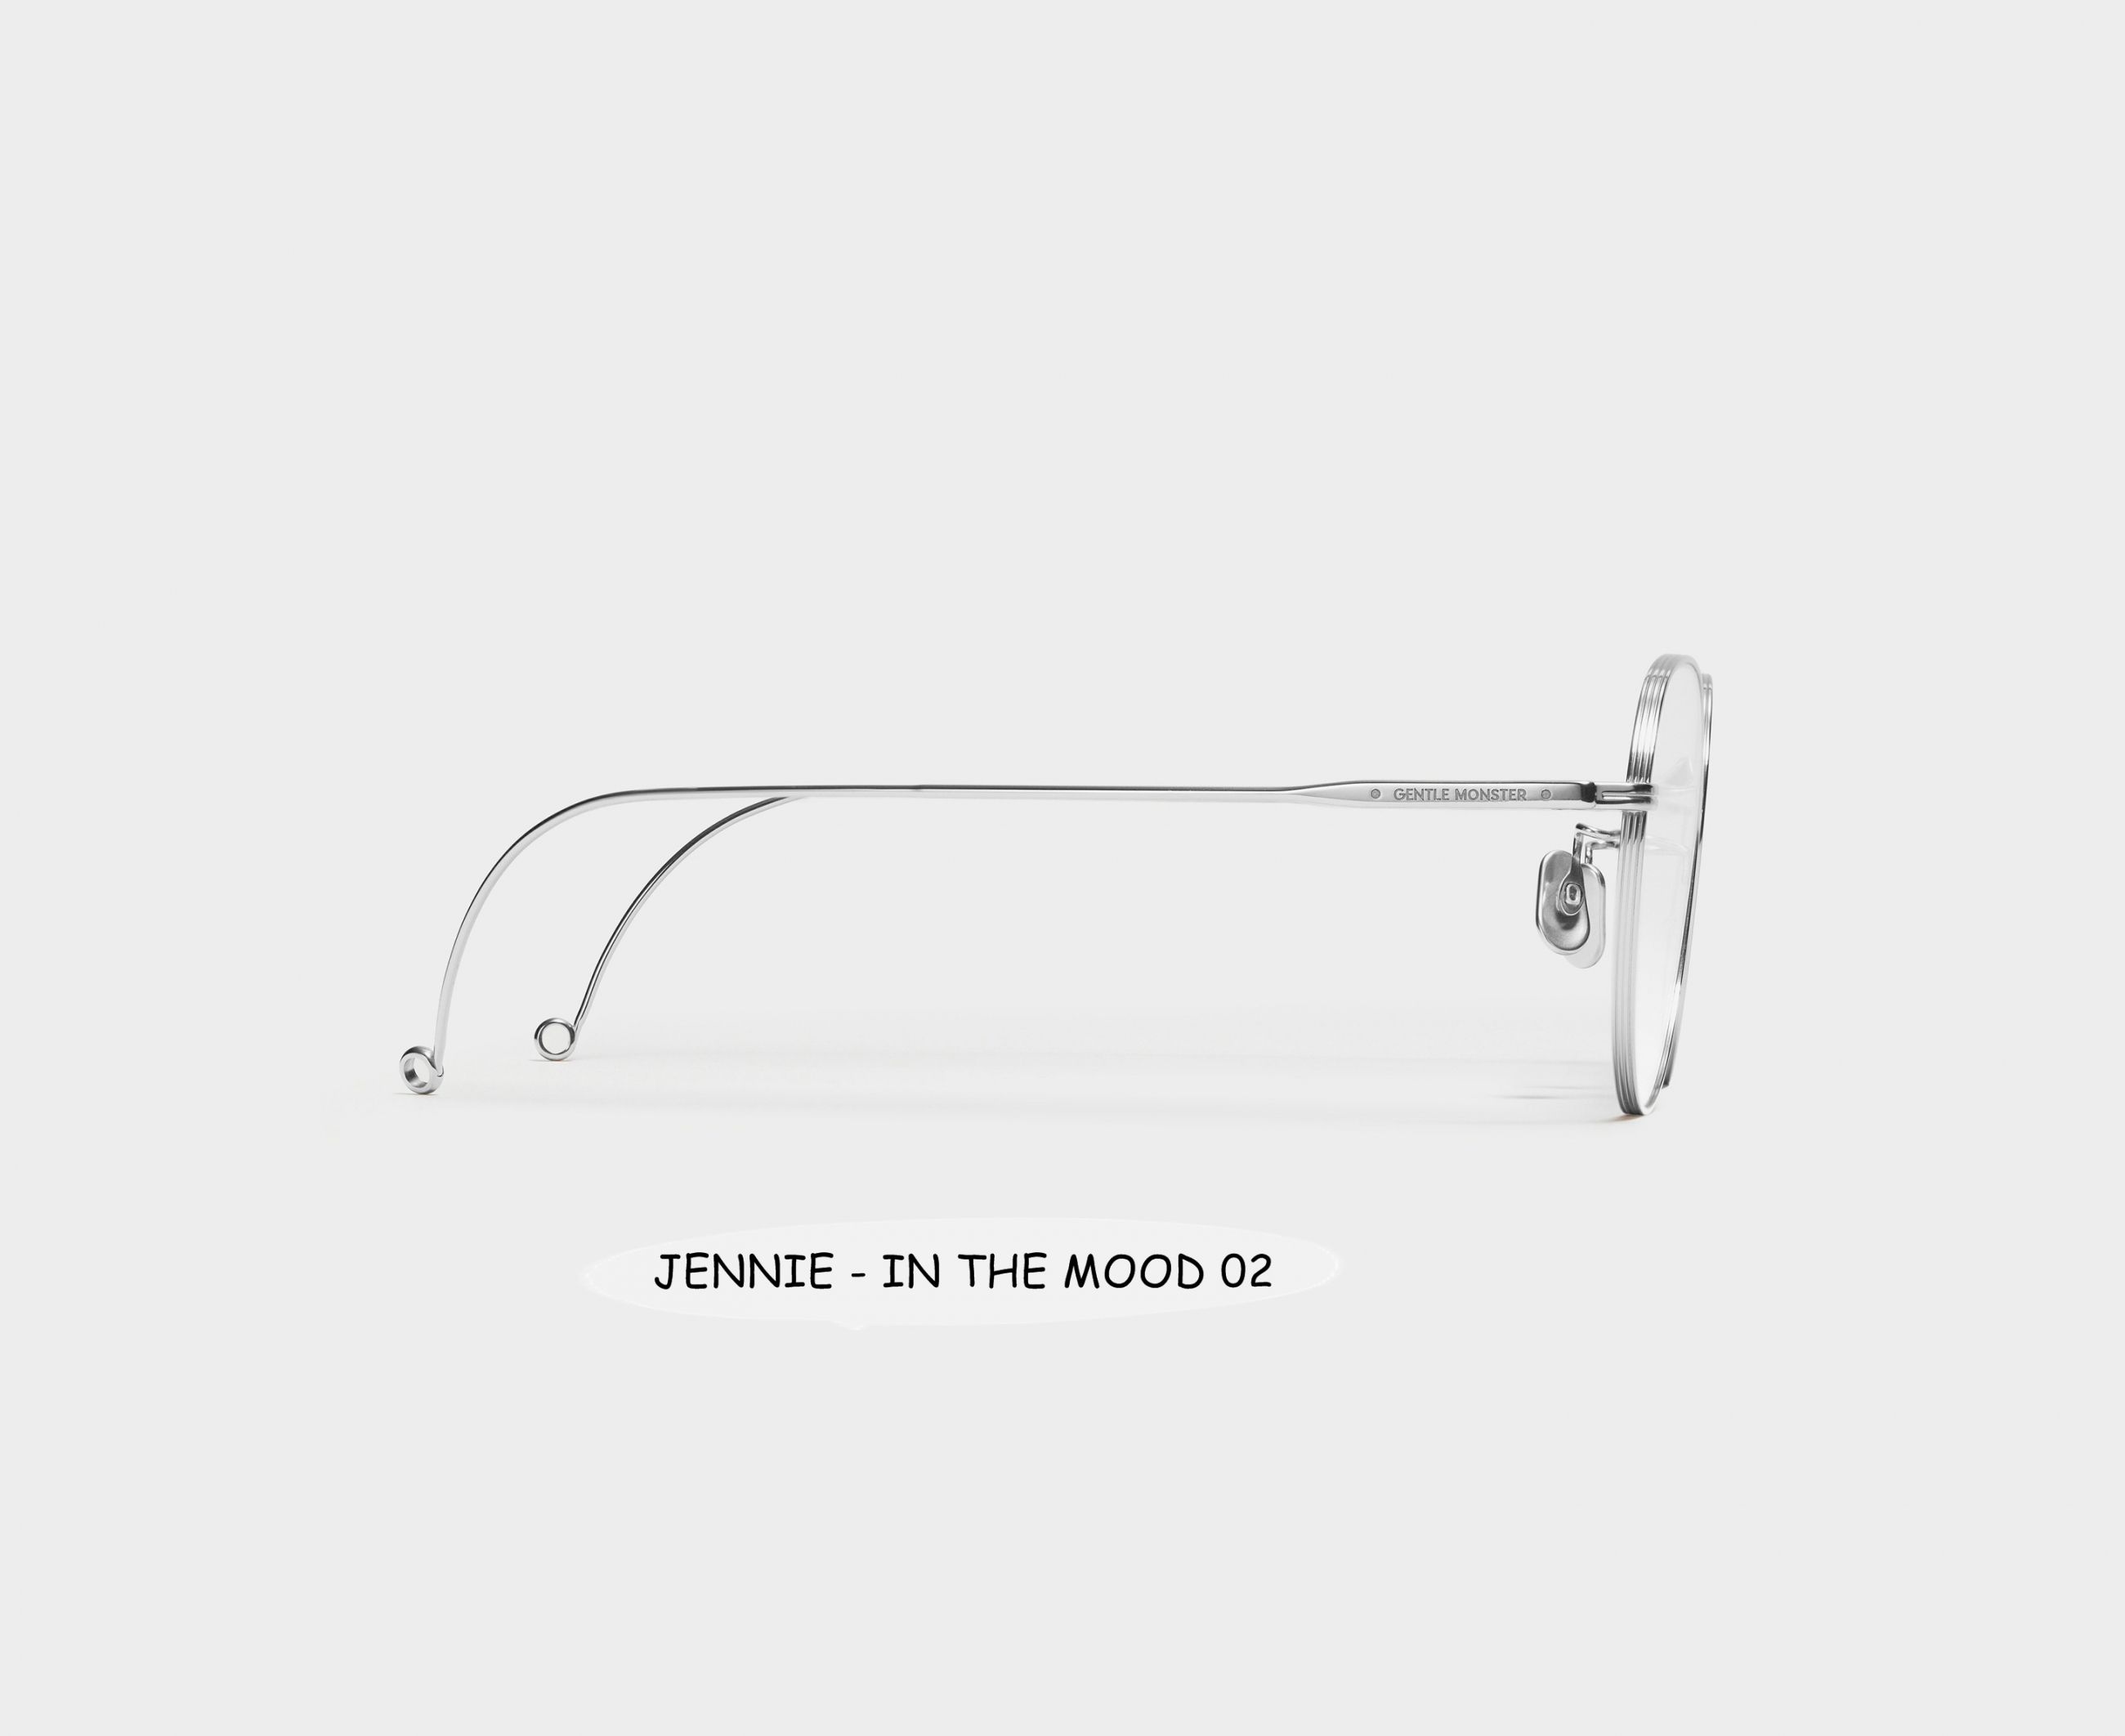 JENNIE - IN THE MOOD 02_3